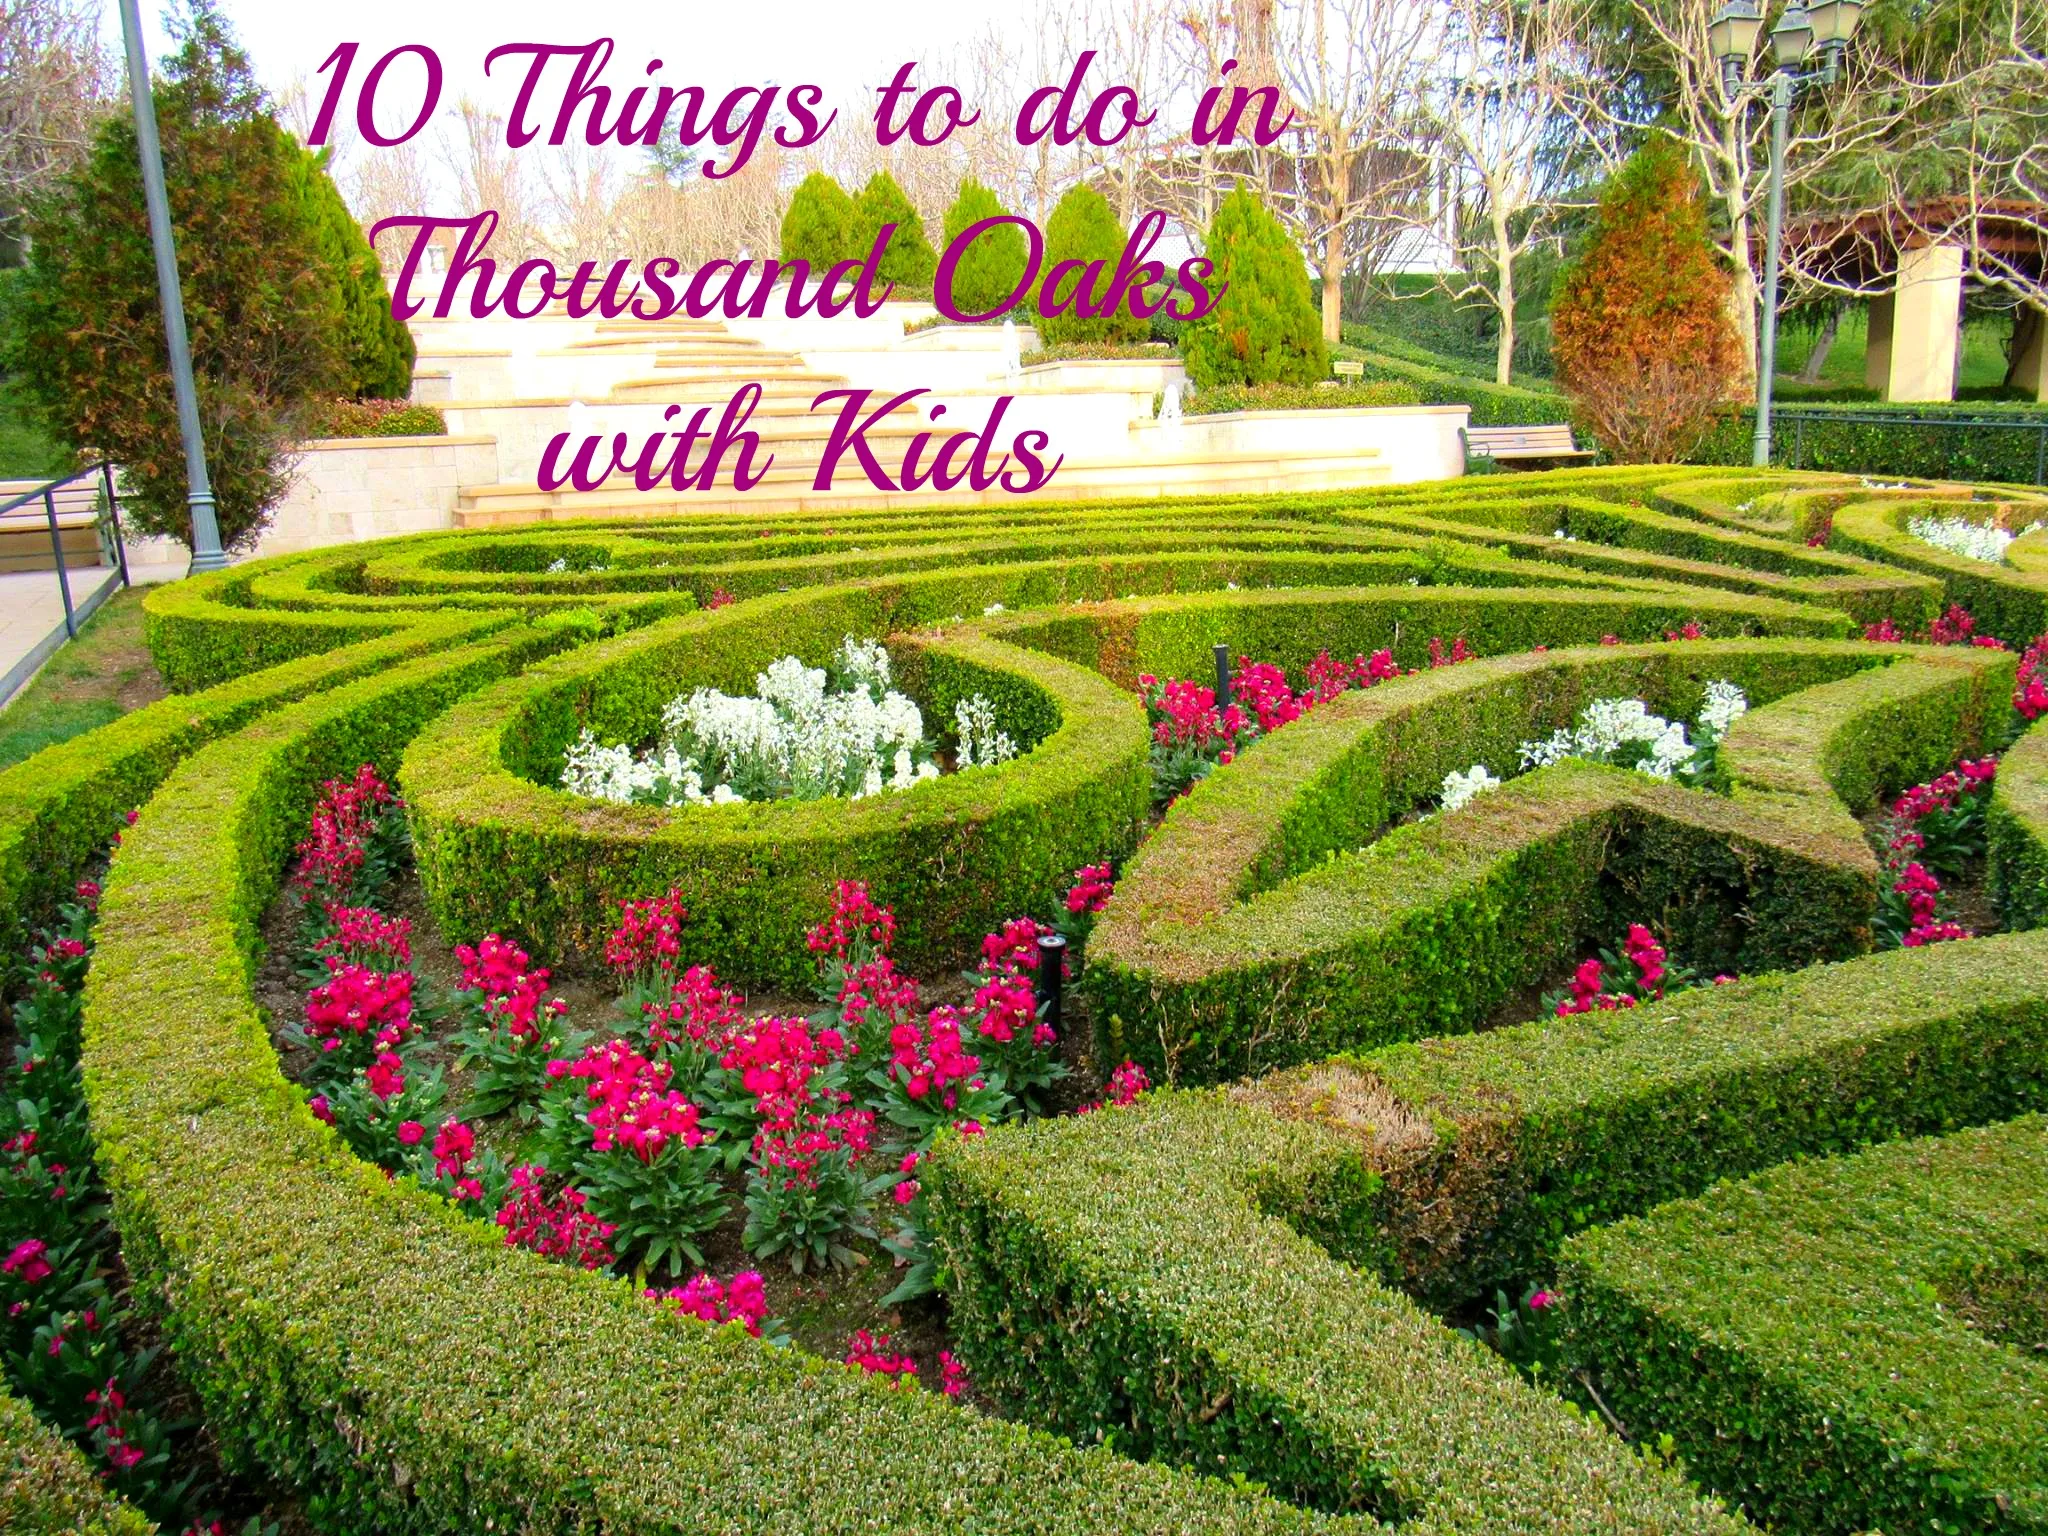 10 Things to do in Thousand Oaks with Kids